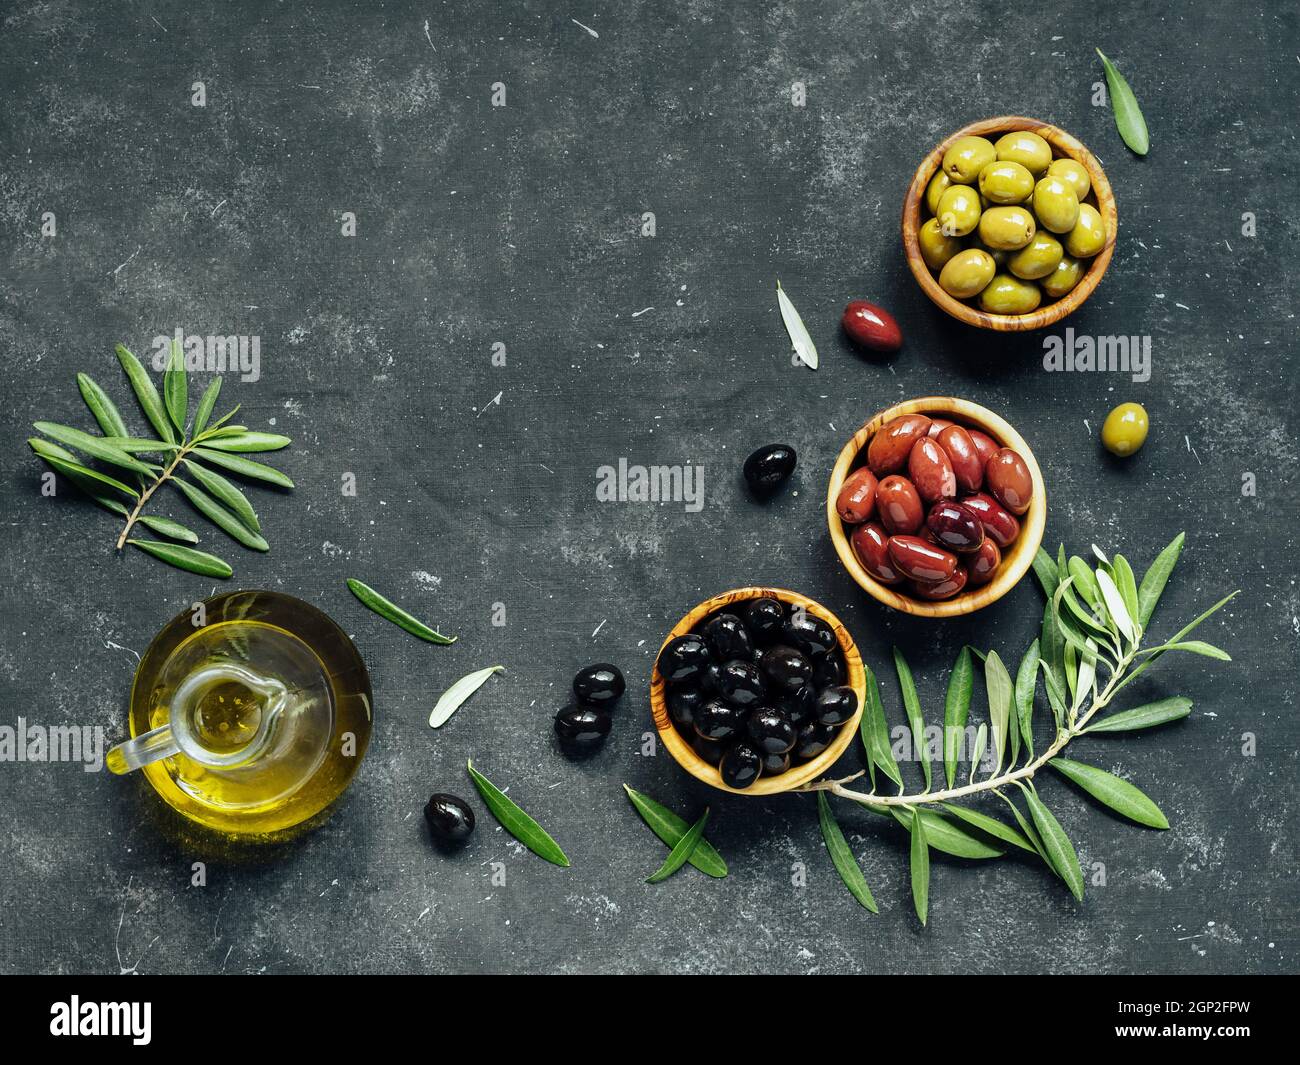 Set of green, black and red or pink olives and olive oil on dark background. Different types of olives in olive wooden bowls and olive oil over dark c Stock Photo